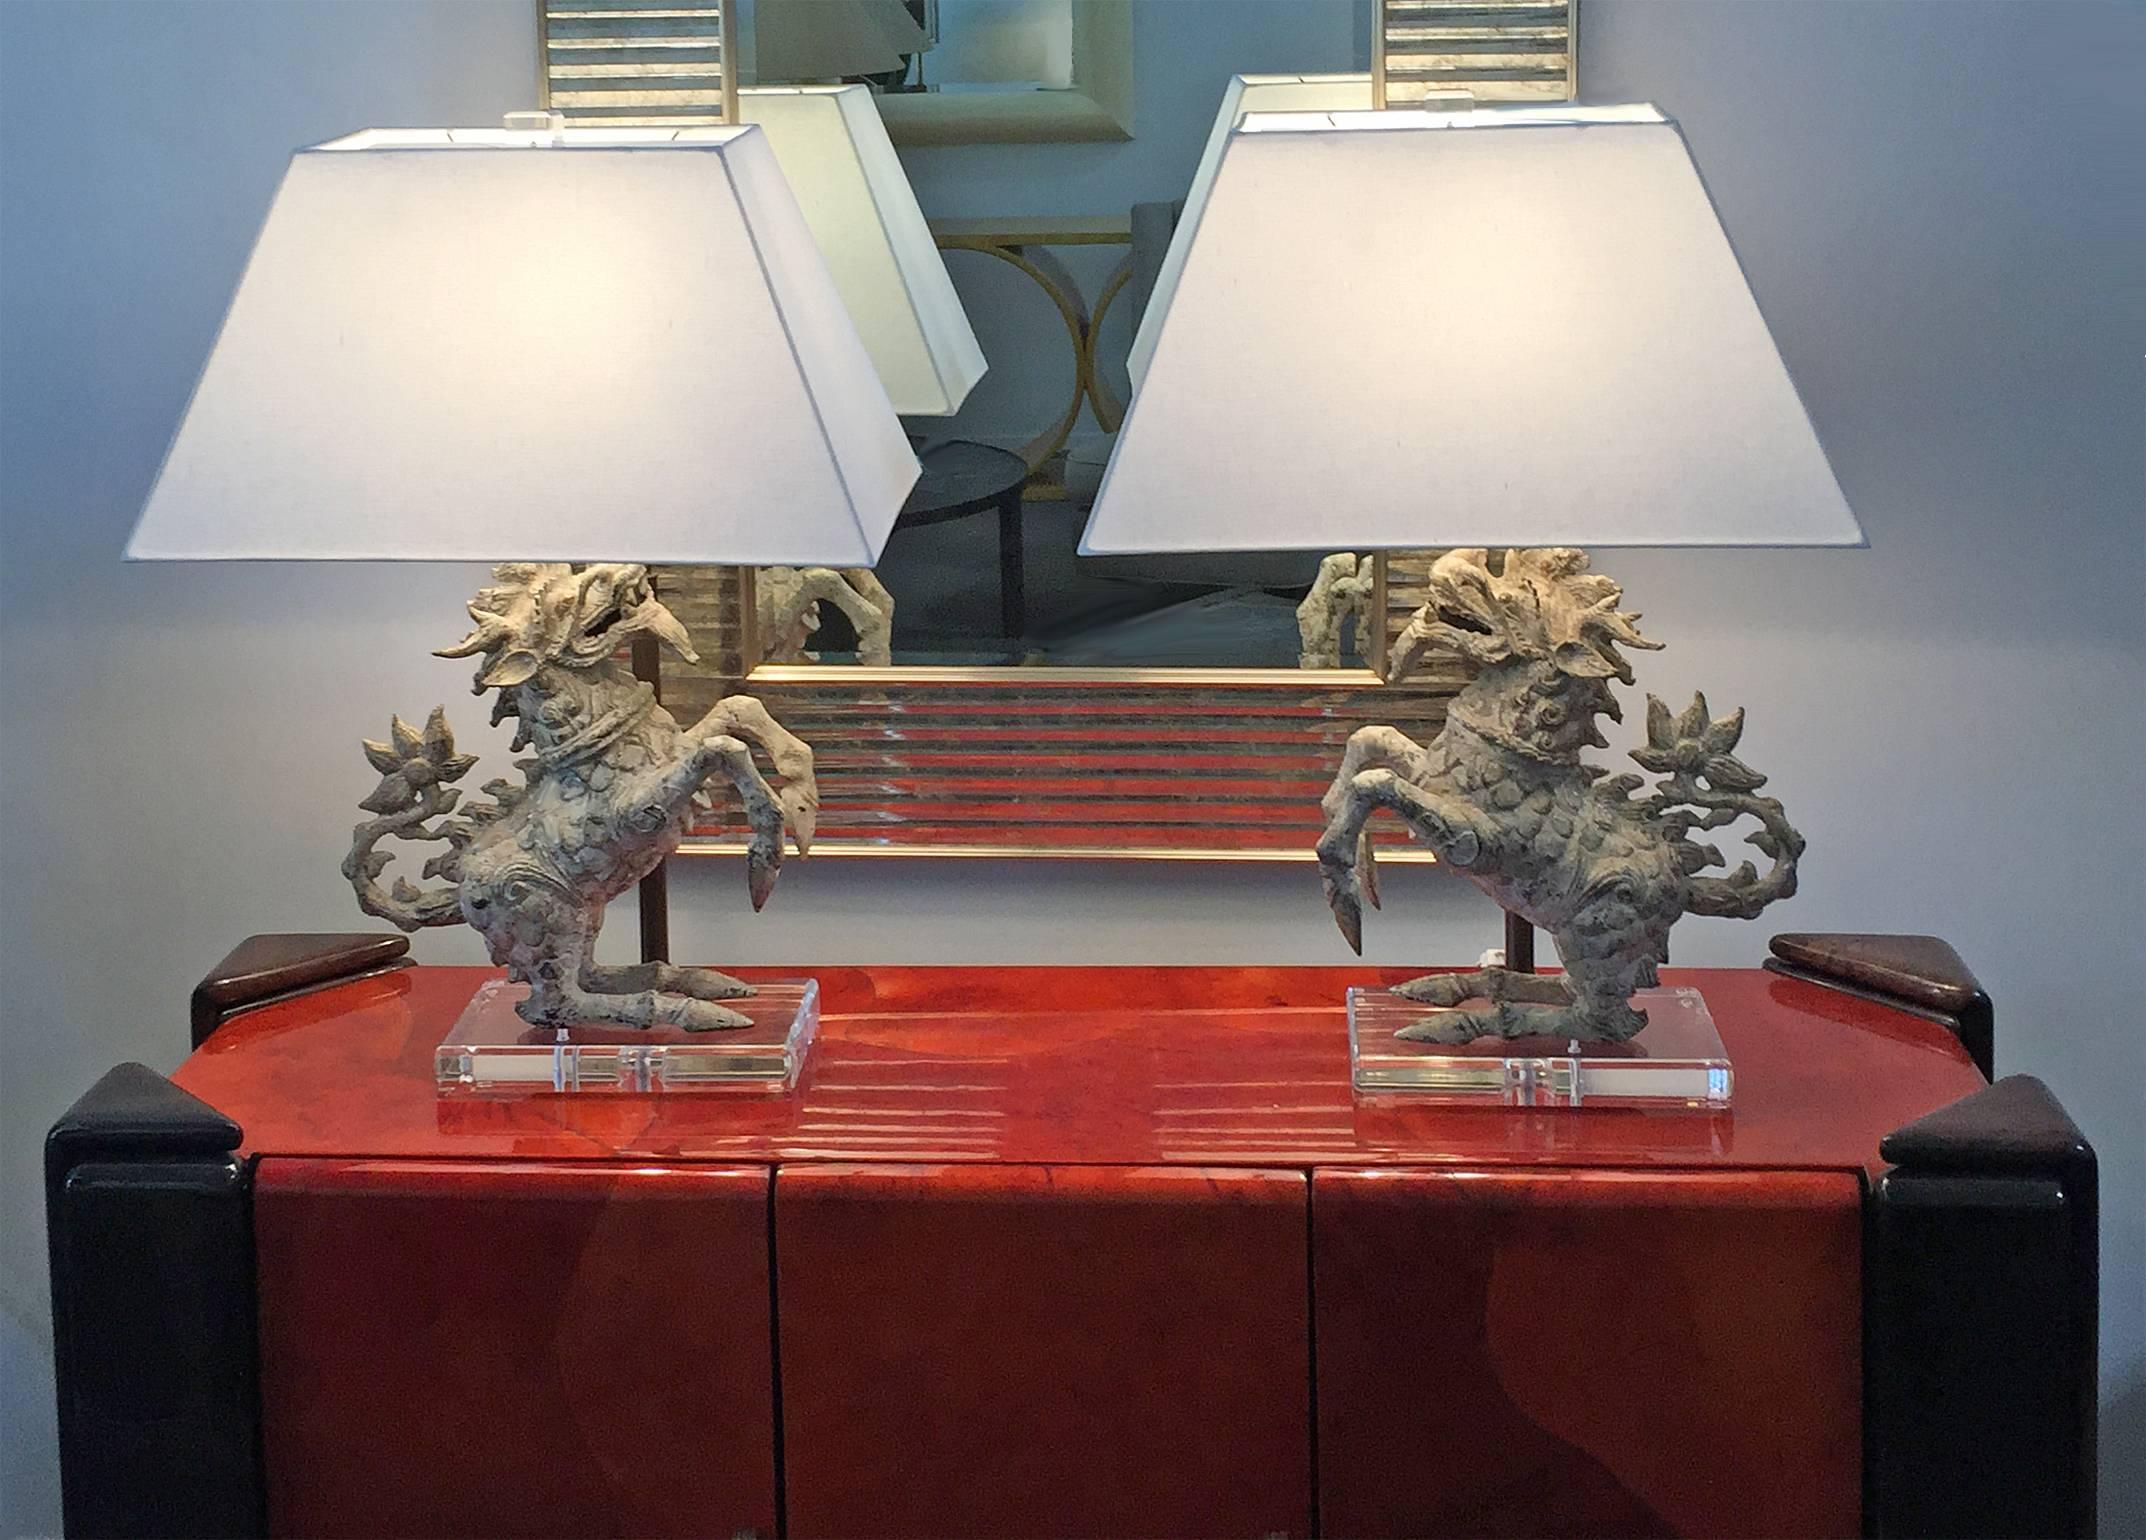 Pair of table lamps featuring patinated metal Foo dogs mounted on heavy Lucite bases. New custom silk shades. Top quality materials and craftsmanship. Price is for the pair. Shade measures: 23